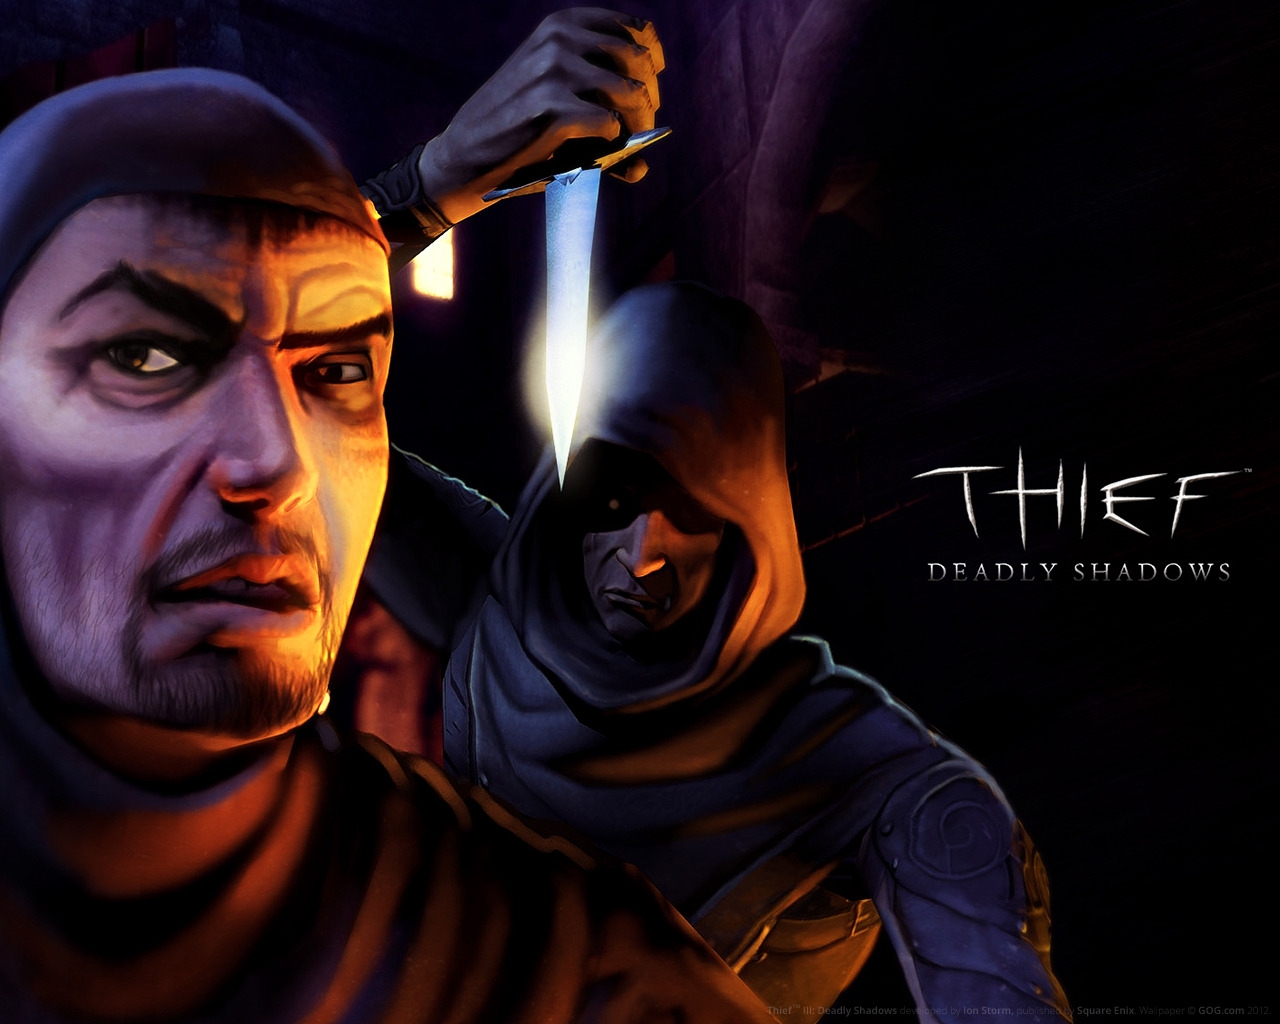 Thief Deadly Shadows for 1280 x 1024 resolution